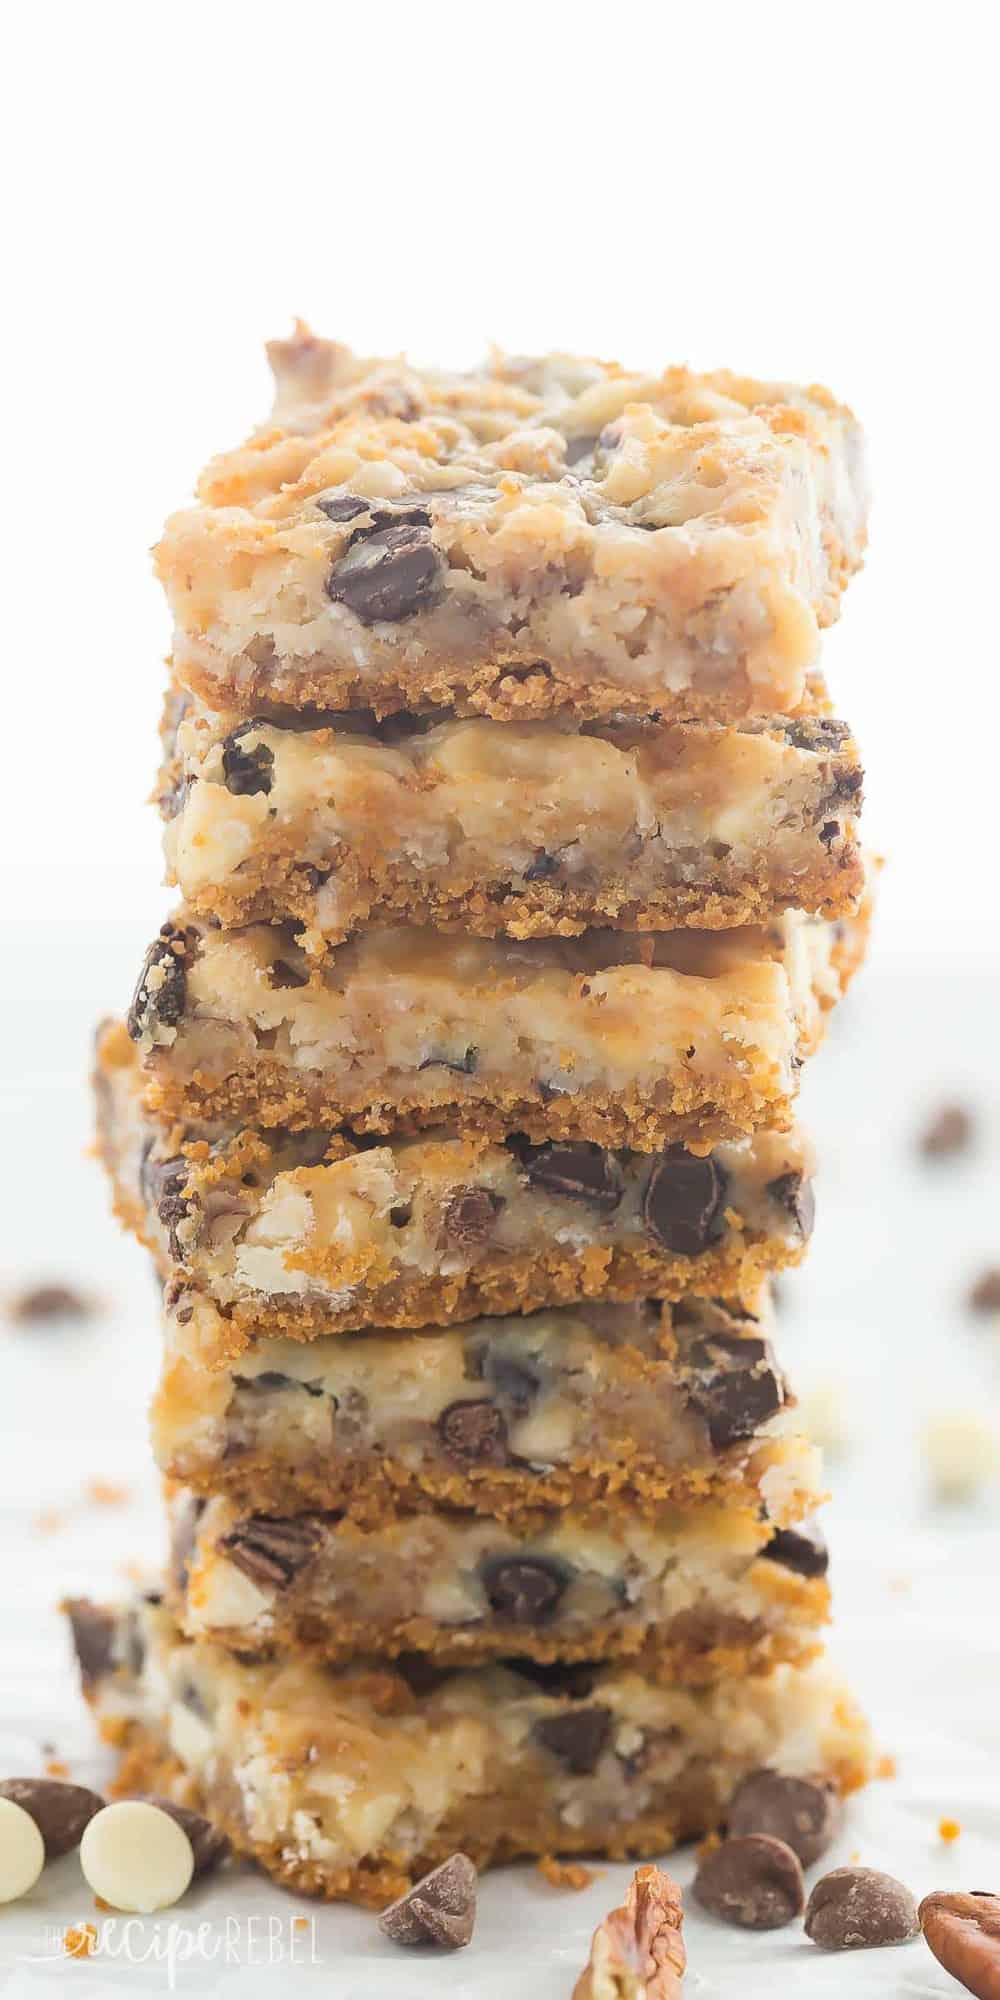 These 7 Layer Magic Bars are made with a graham cracker base, chocolate chips, nuts, coconut and sweetened condensed milk â€“ they are the perfect mix of gooey, crunchy, sweet and salty and they are so easy!